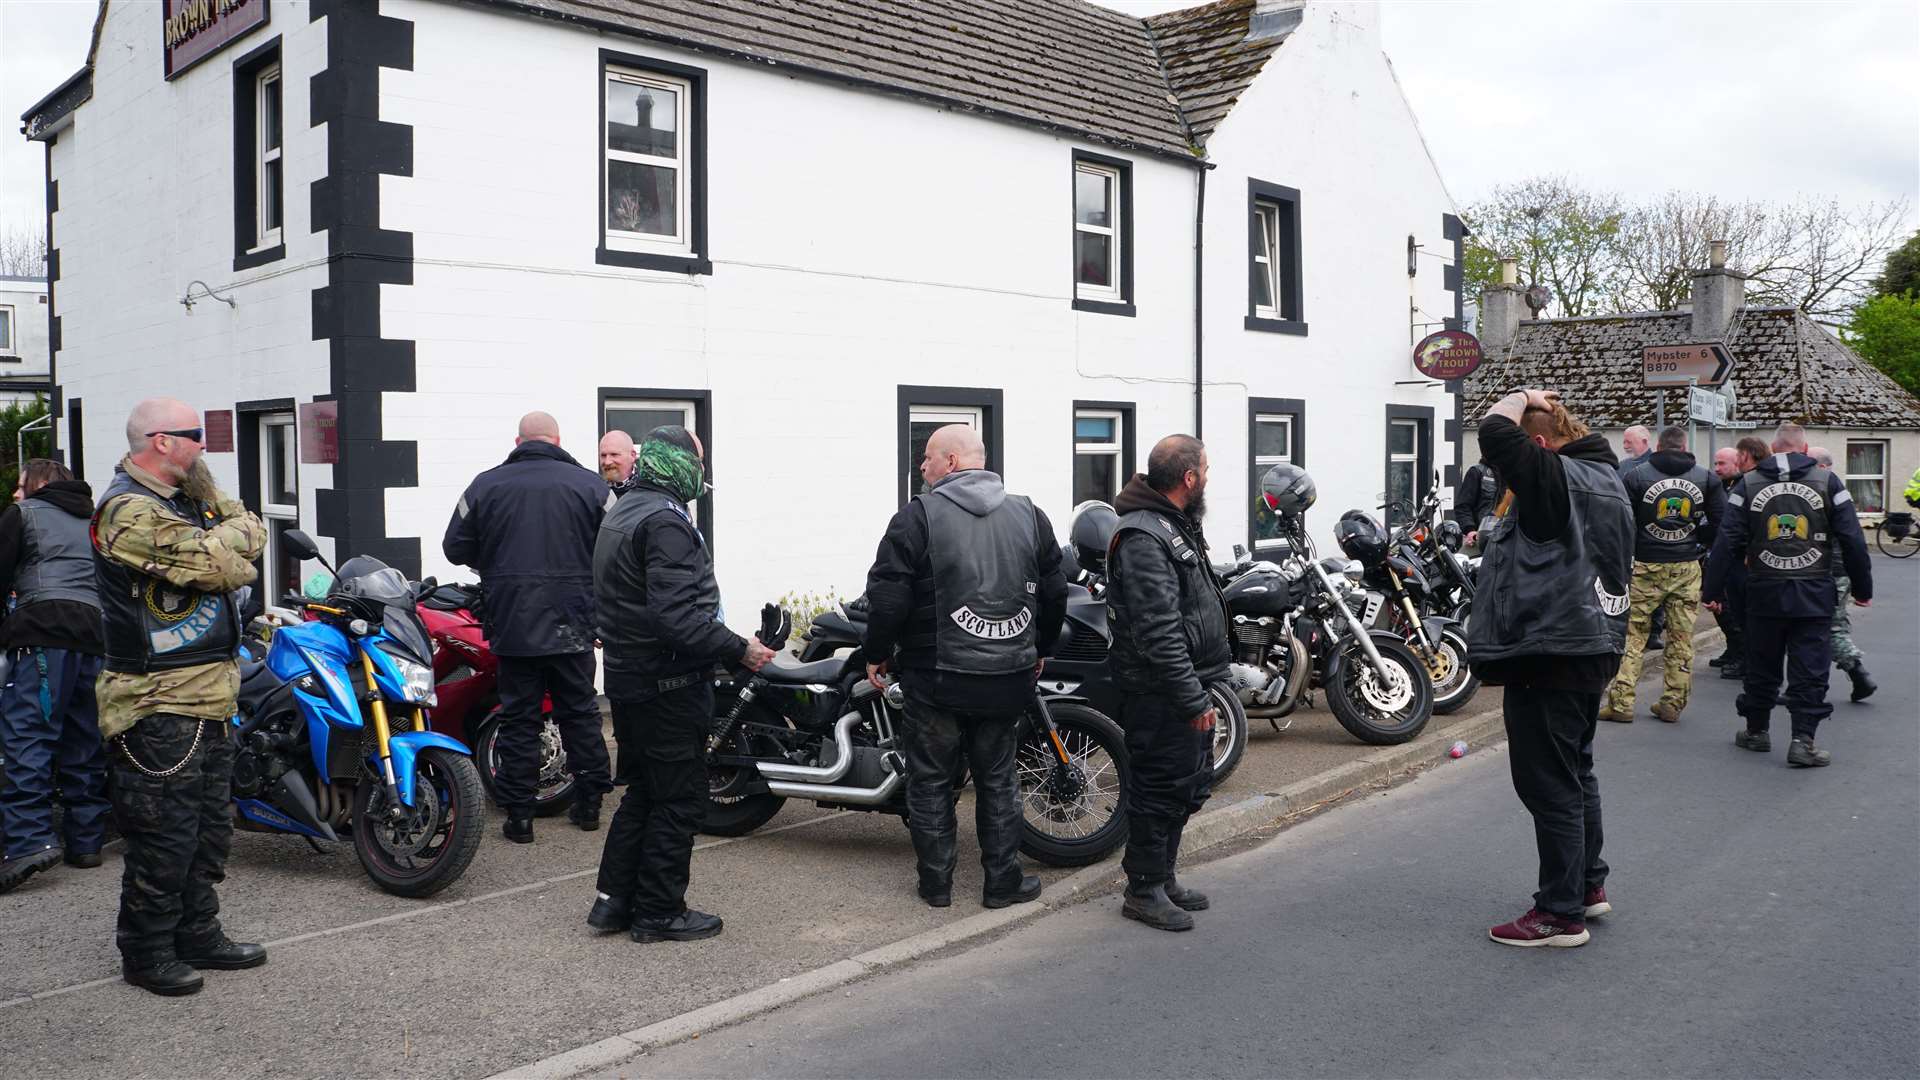 The Blue Angels Motorcycle Club stayed in Watten for around 15 minutes and members asked if the local pub was open. Picture: DGS